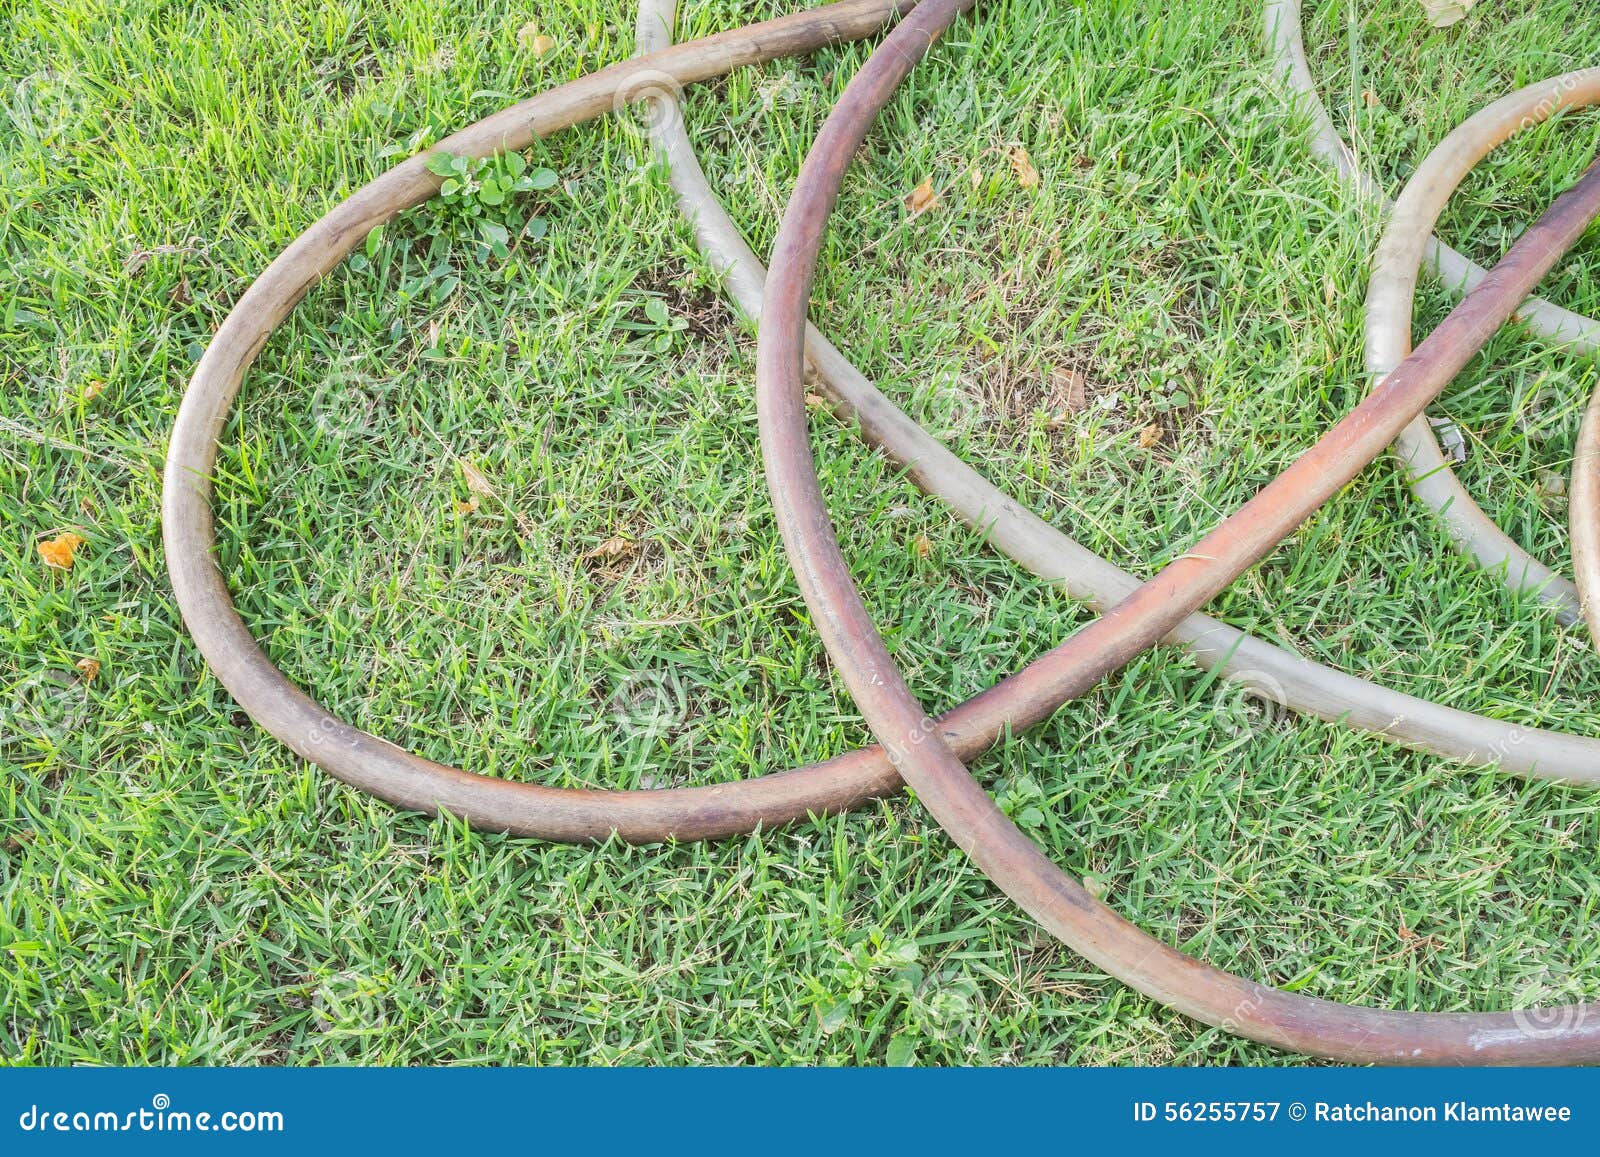 Hose watering stock image. Image of tube, outdoor, water ...